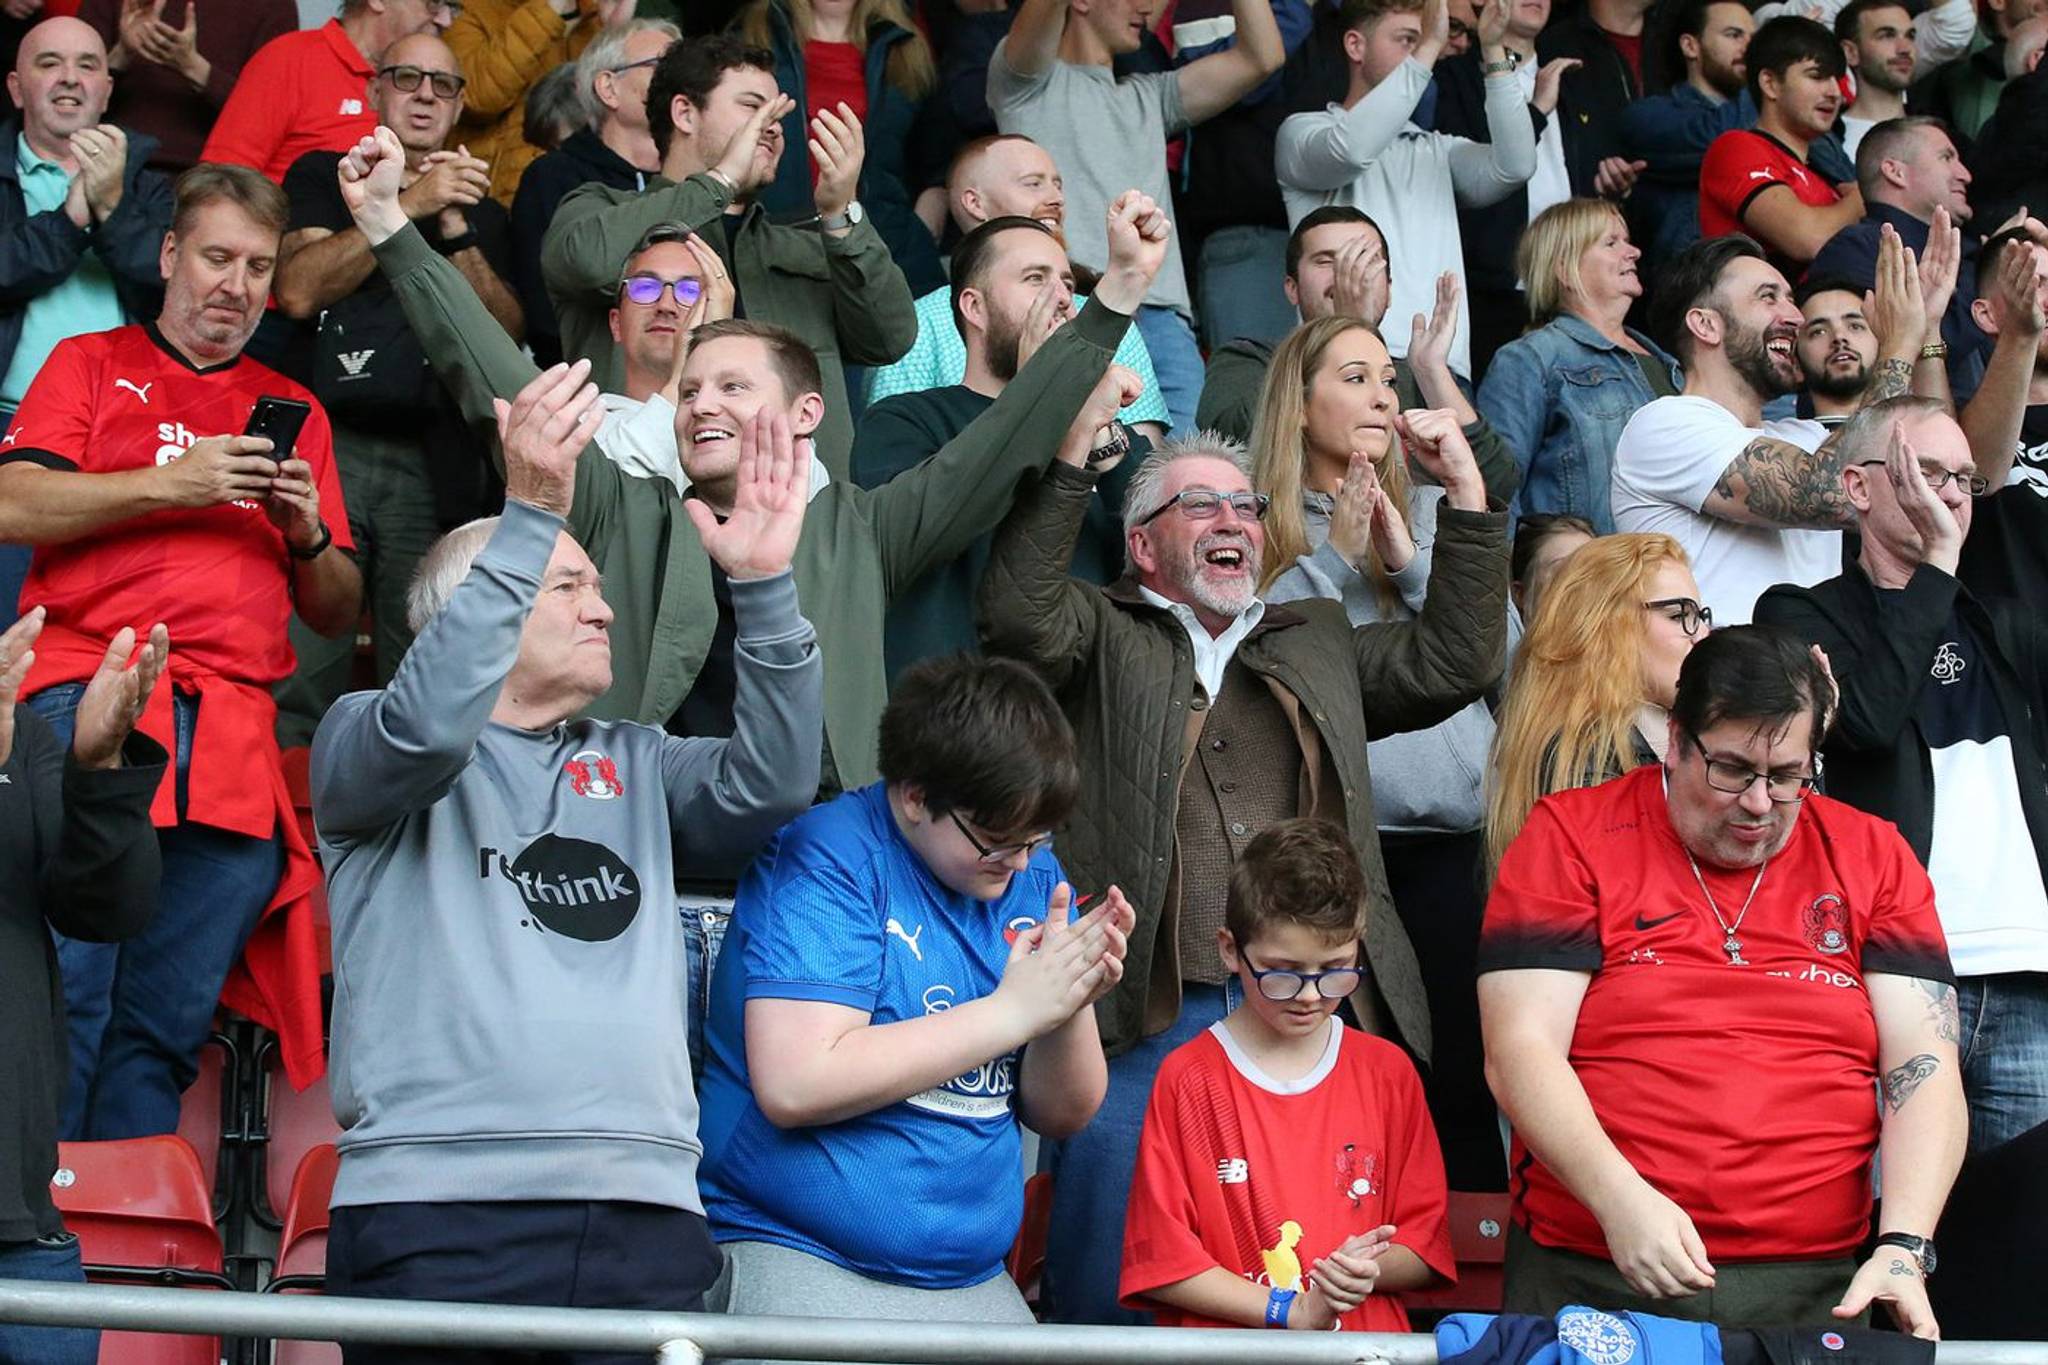 Leyton Orient helps fans maintain support on a budget